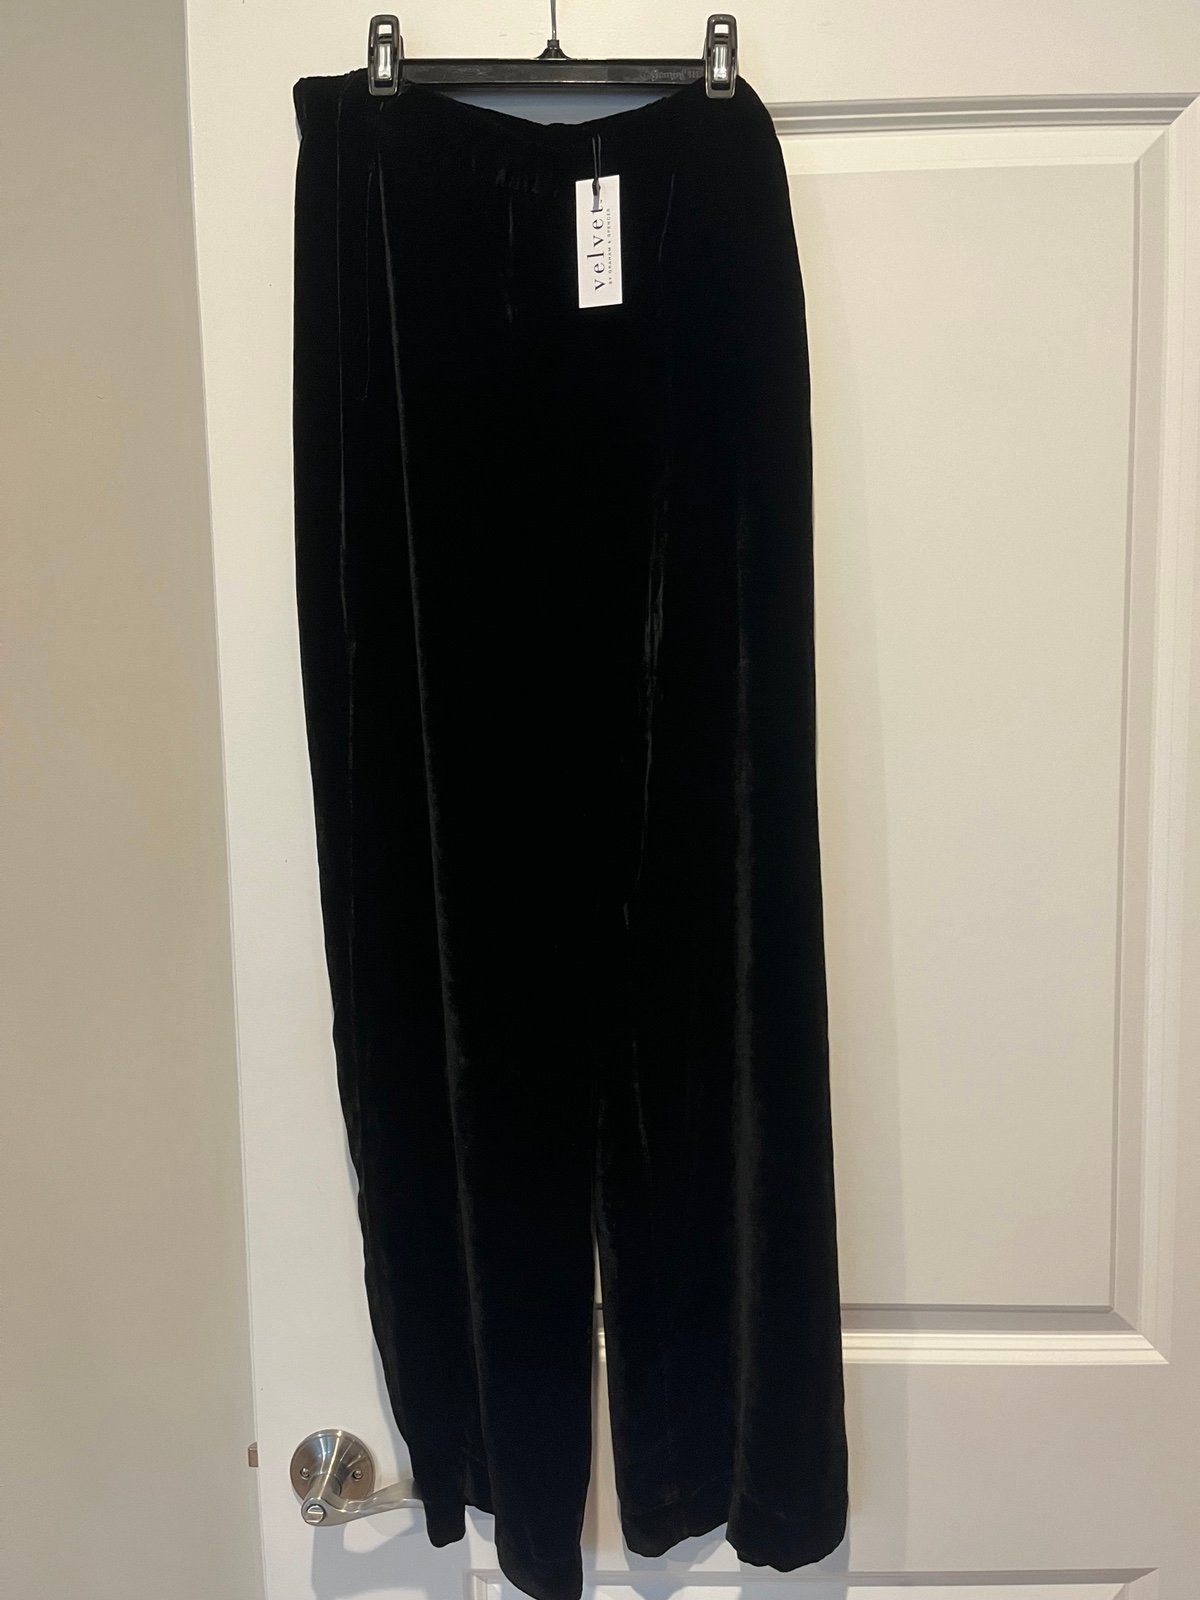 Nice Velvet by Graham and Spencer pants nGkozS49y Low P